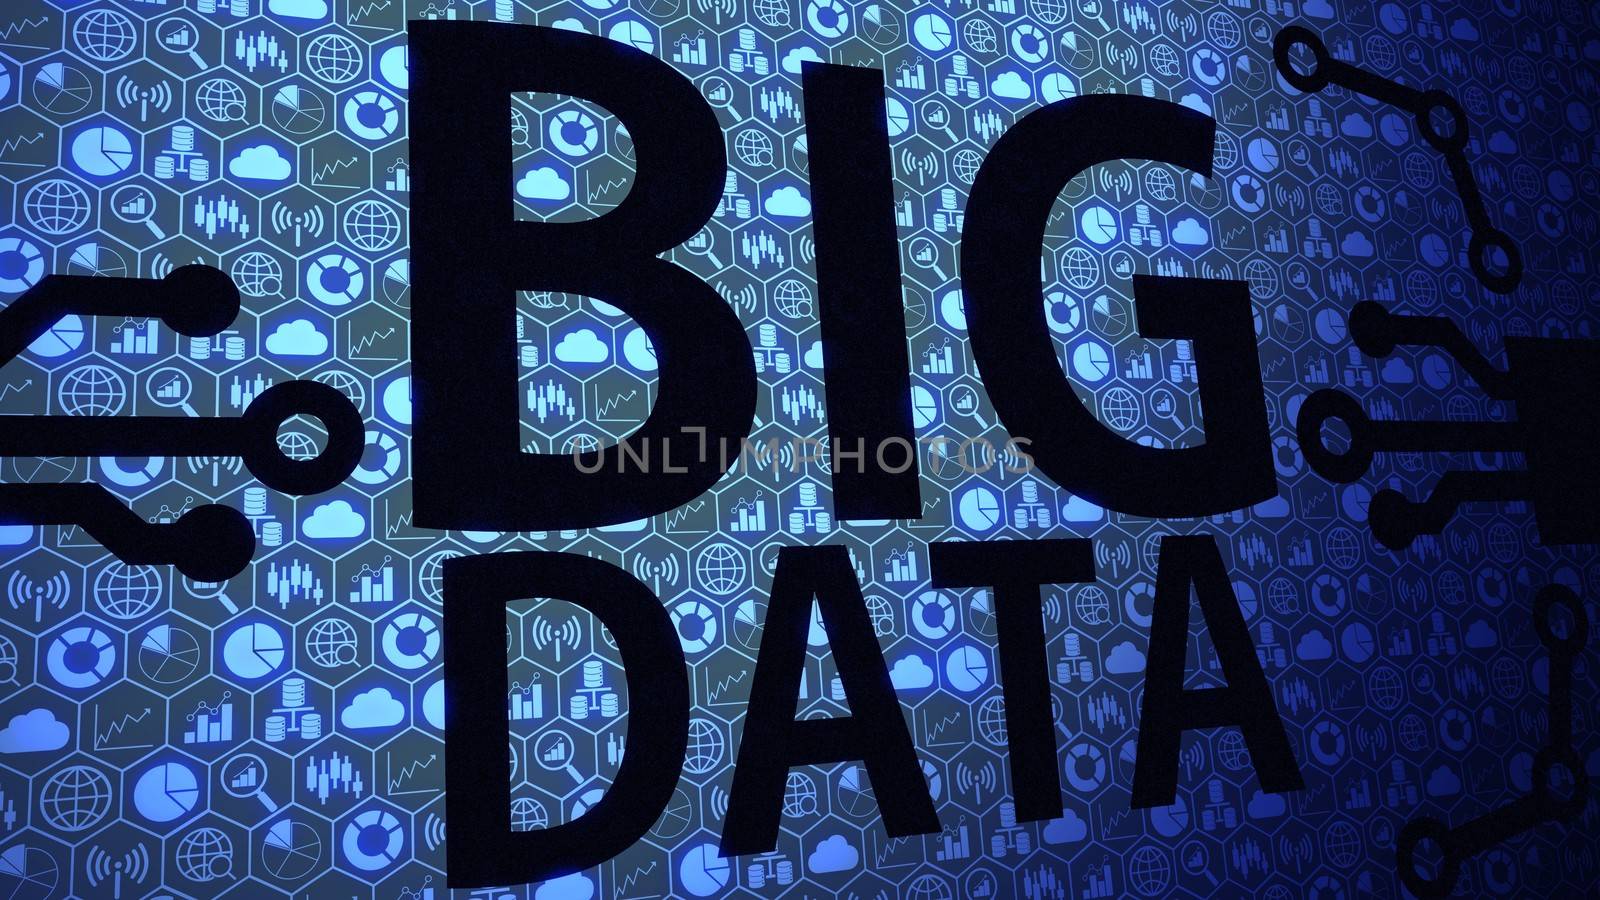 Big Data Big Picture Background Composed of Big Data Icons and Big Data Text with Blue Light Ver.3 of 4 (Different Angle)